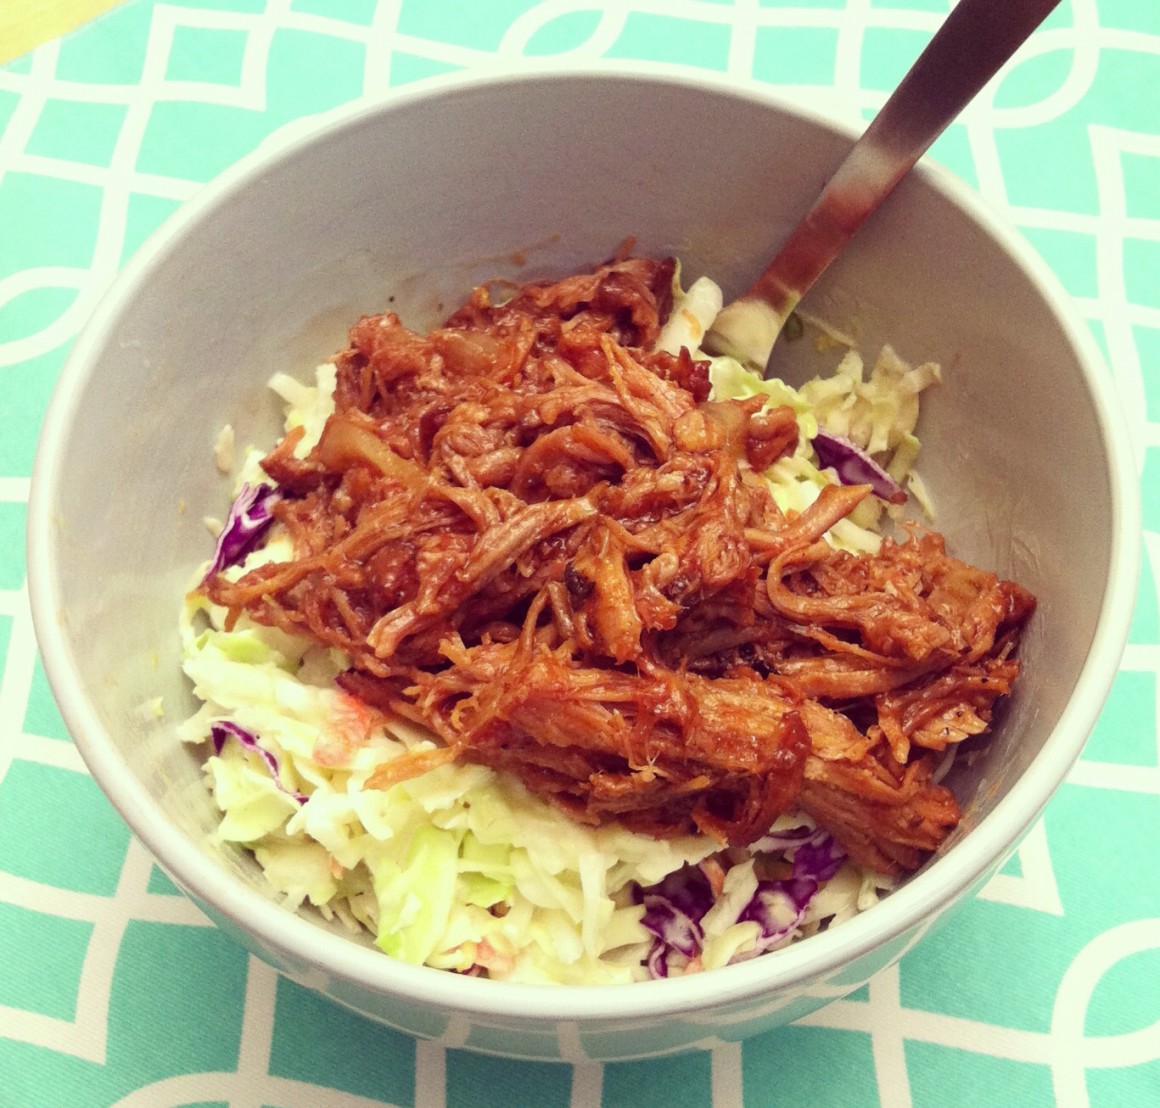 The best pulled pork recipe around! Set your crockpot in the morning and come home to soda pop pulled pork sandwiches! Can be made with root beer, dr. pepper, coke, pepsi or any other cola or pop that you love!